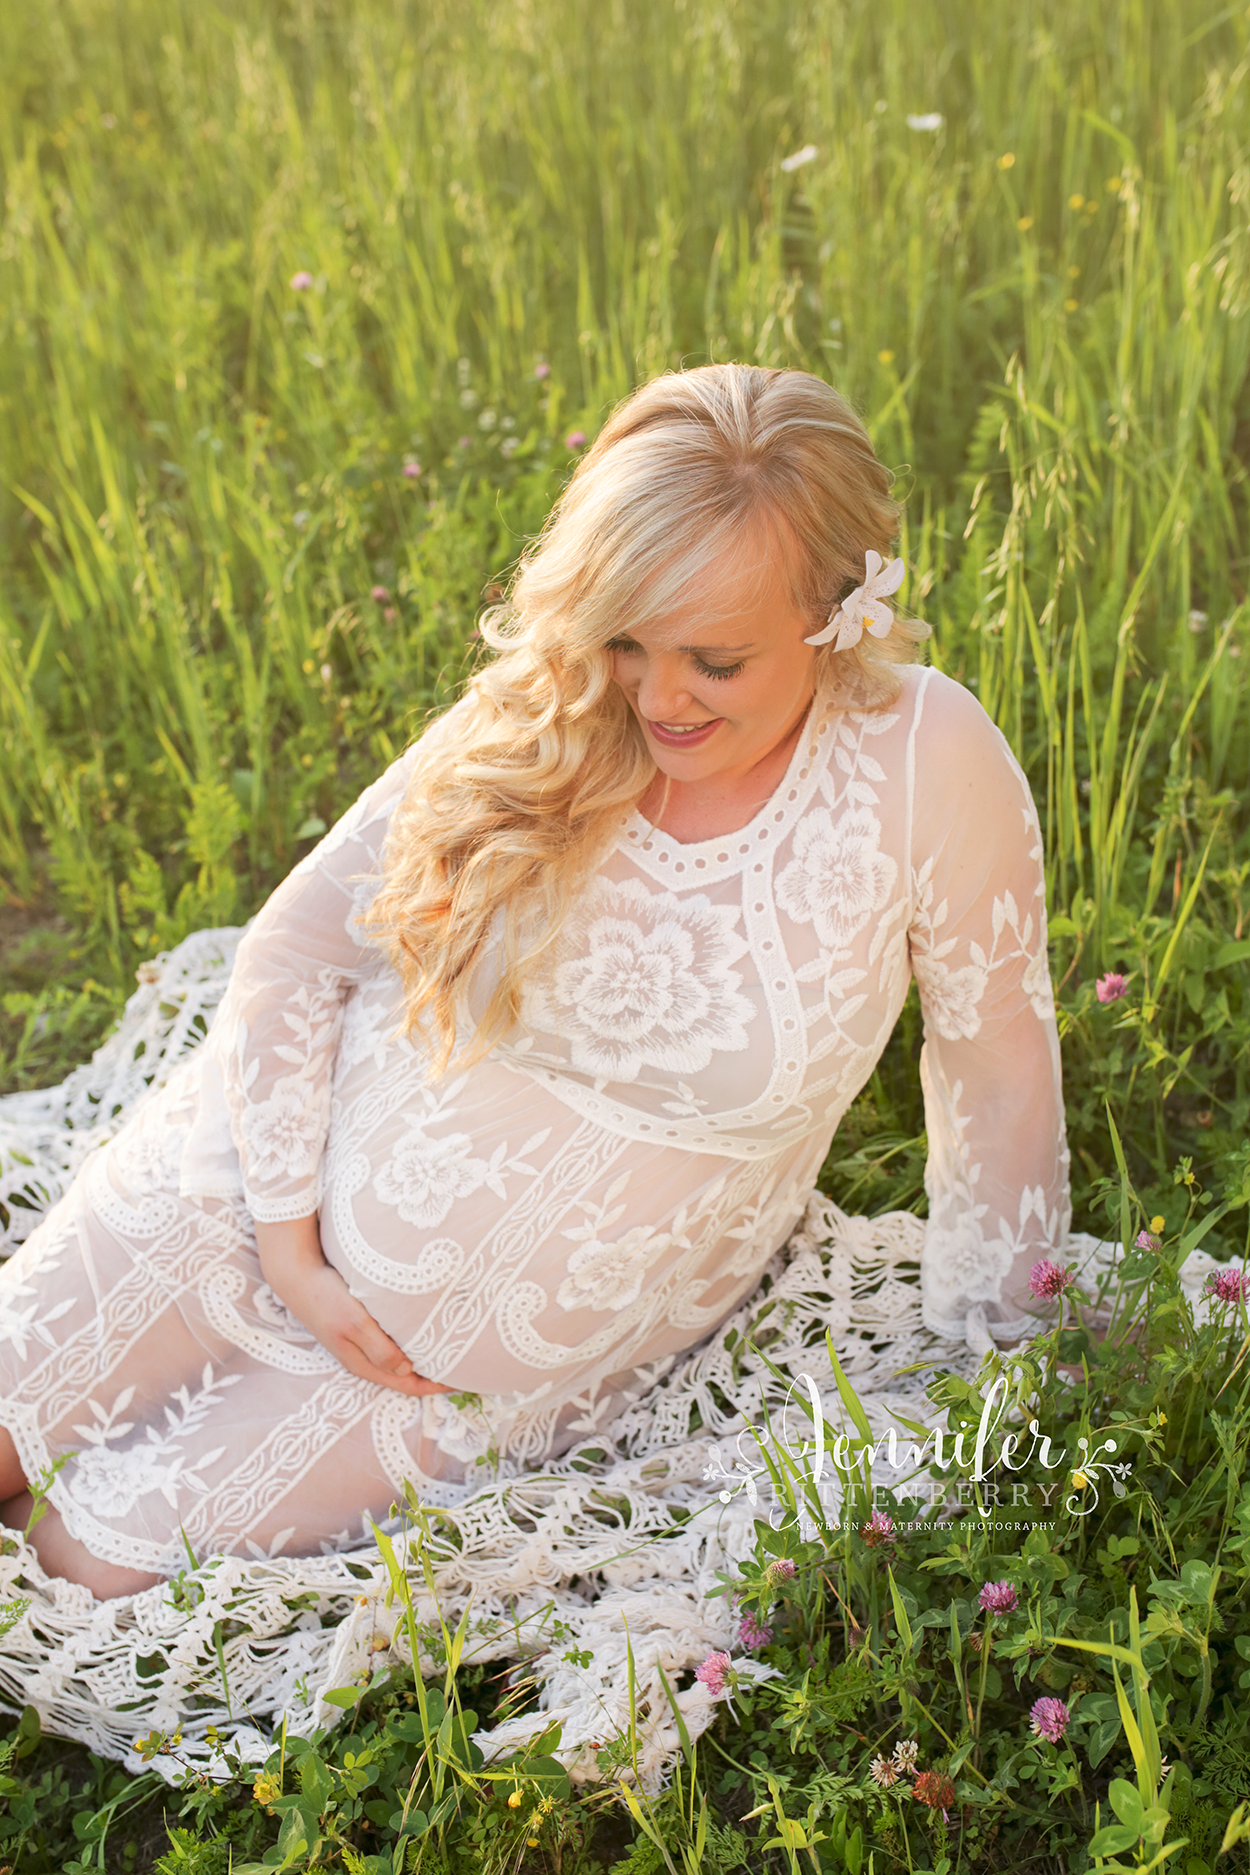 Louisville KY Maternity Photographer, baby bump, preggo, pregnancy, outdoor photos, sunset session, styled maternity, boho chic, vintage, lace